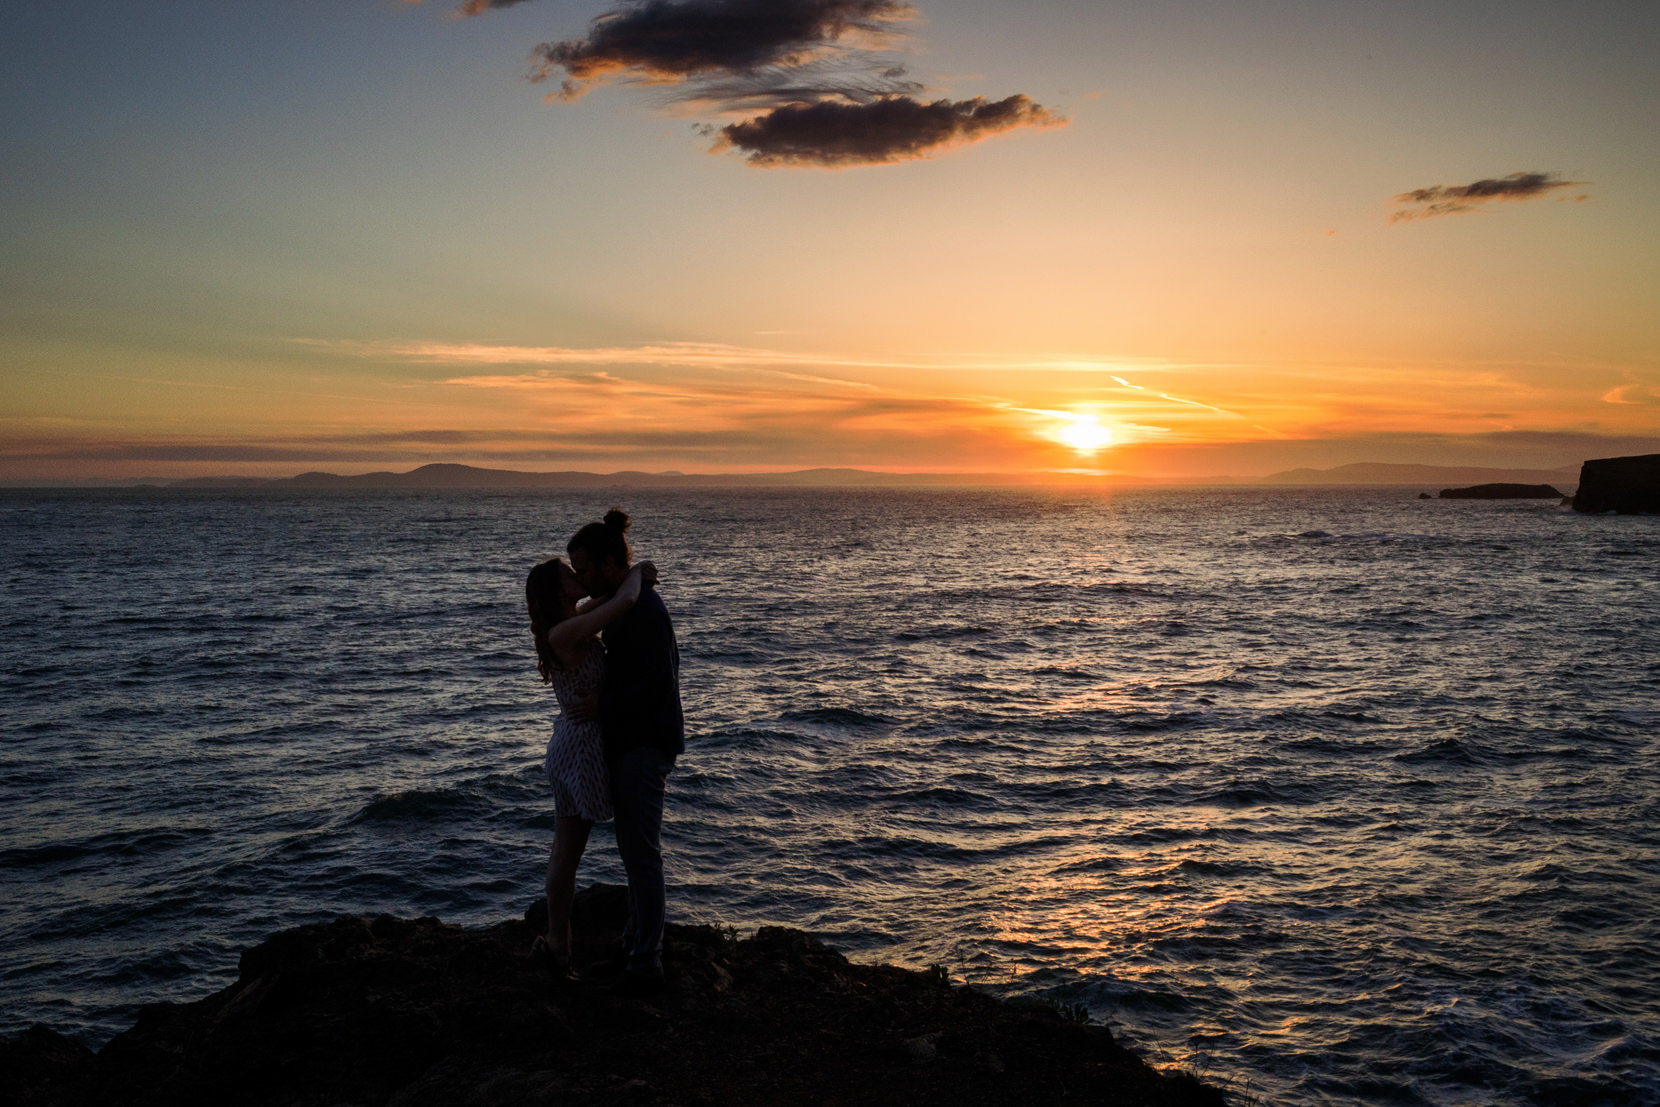 Whidbey Island Engagement Photos